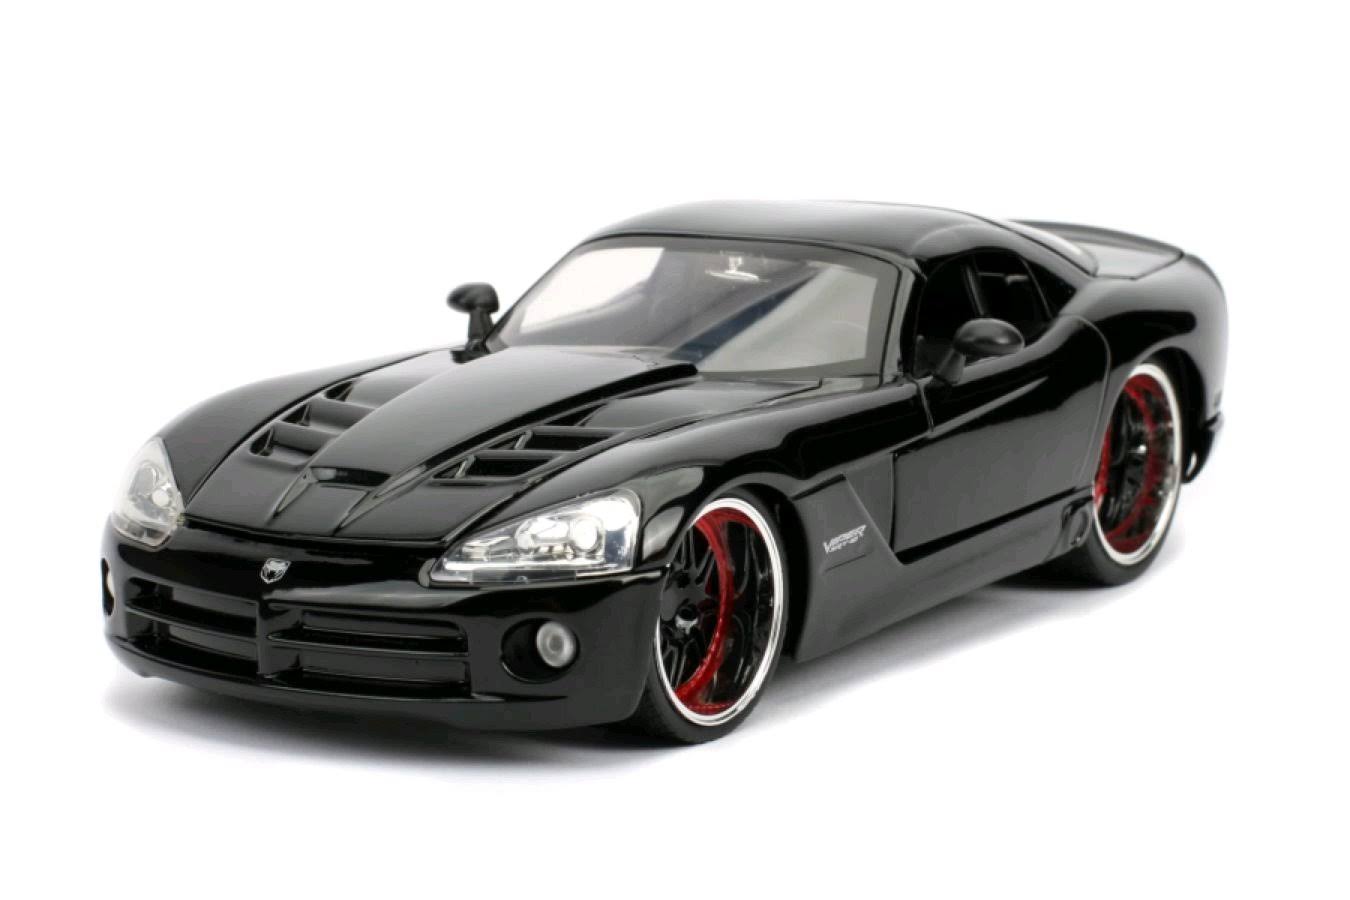 Fast and Furious Lettys Dodge Viper SRT-10 1:24 Scale Jada 30731